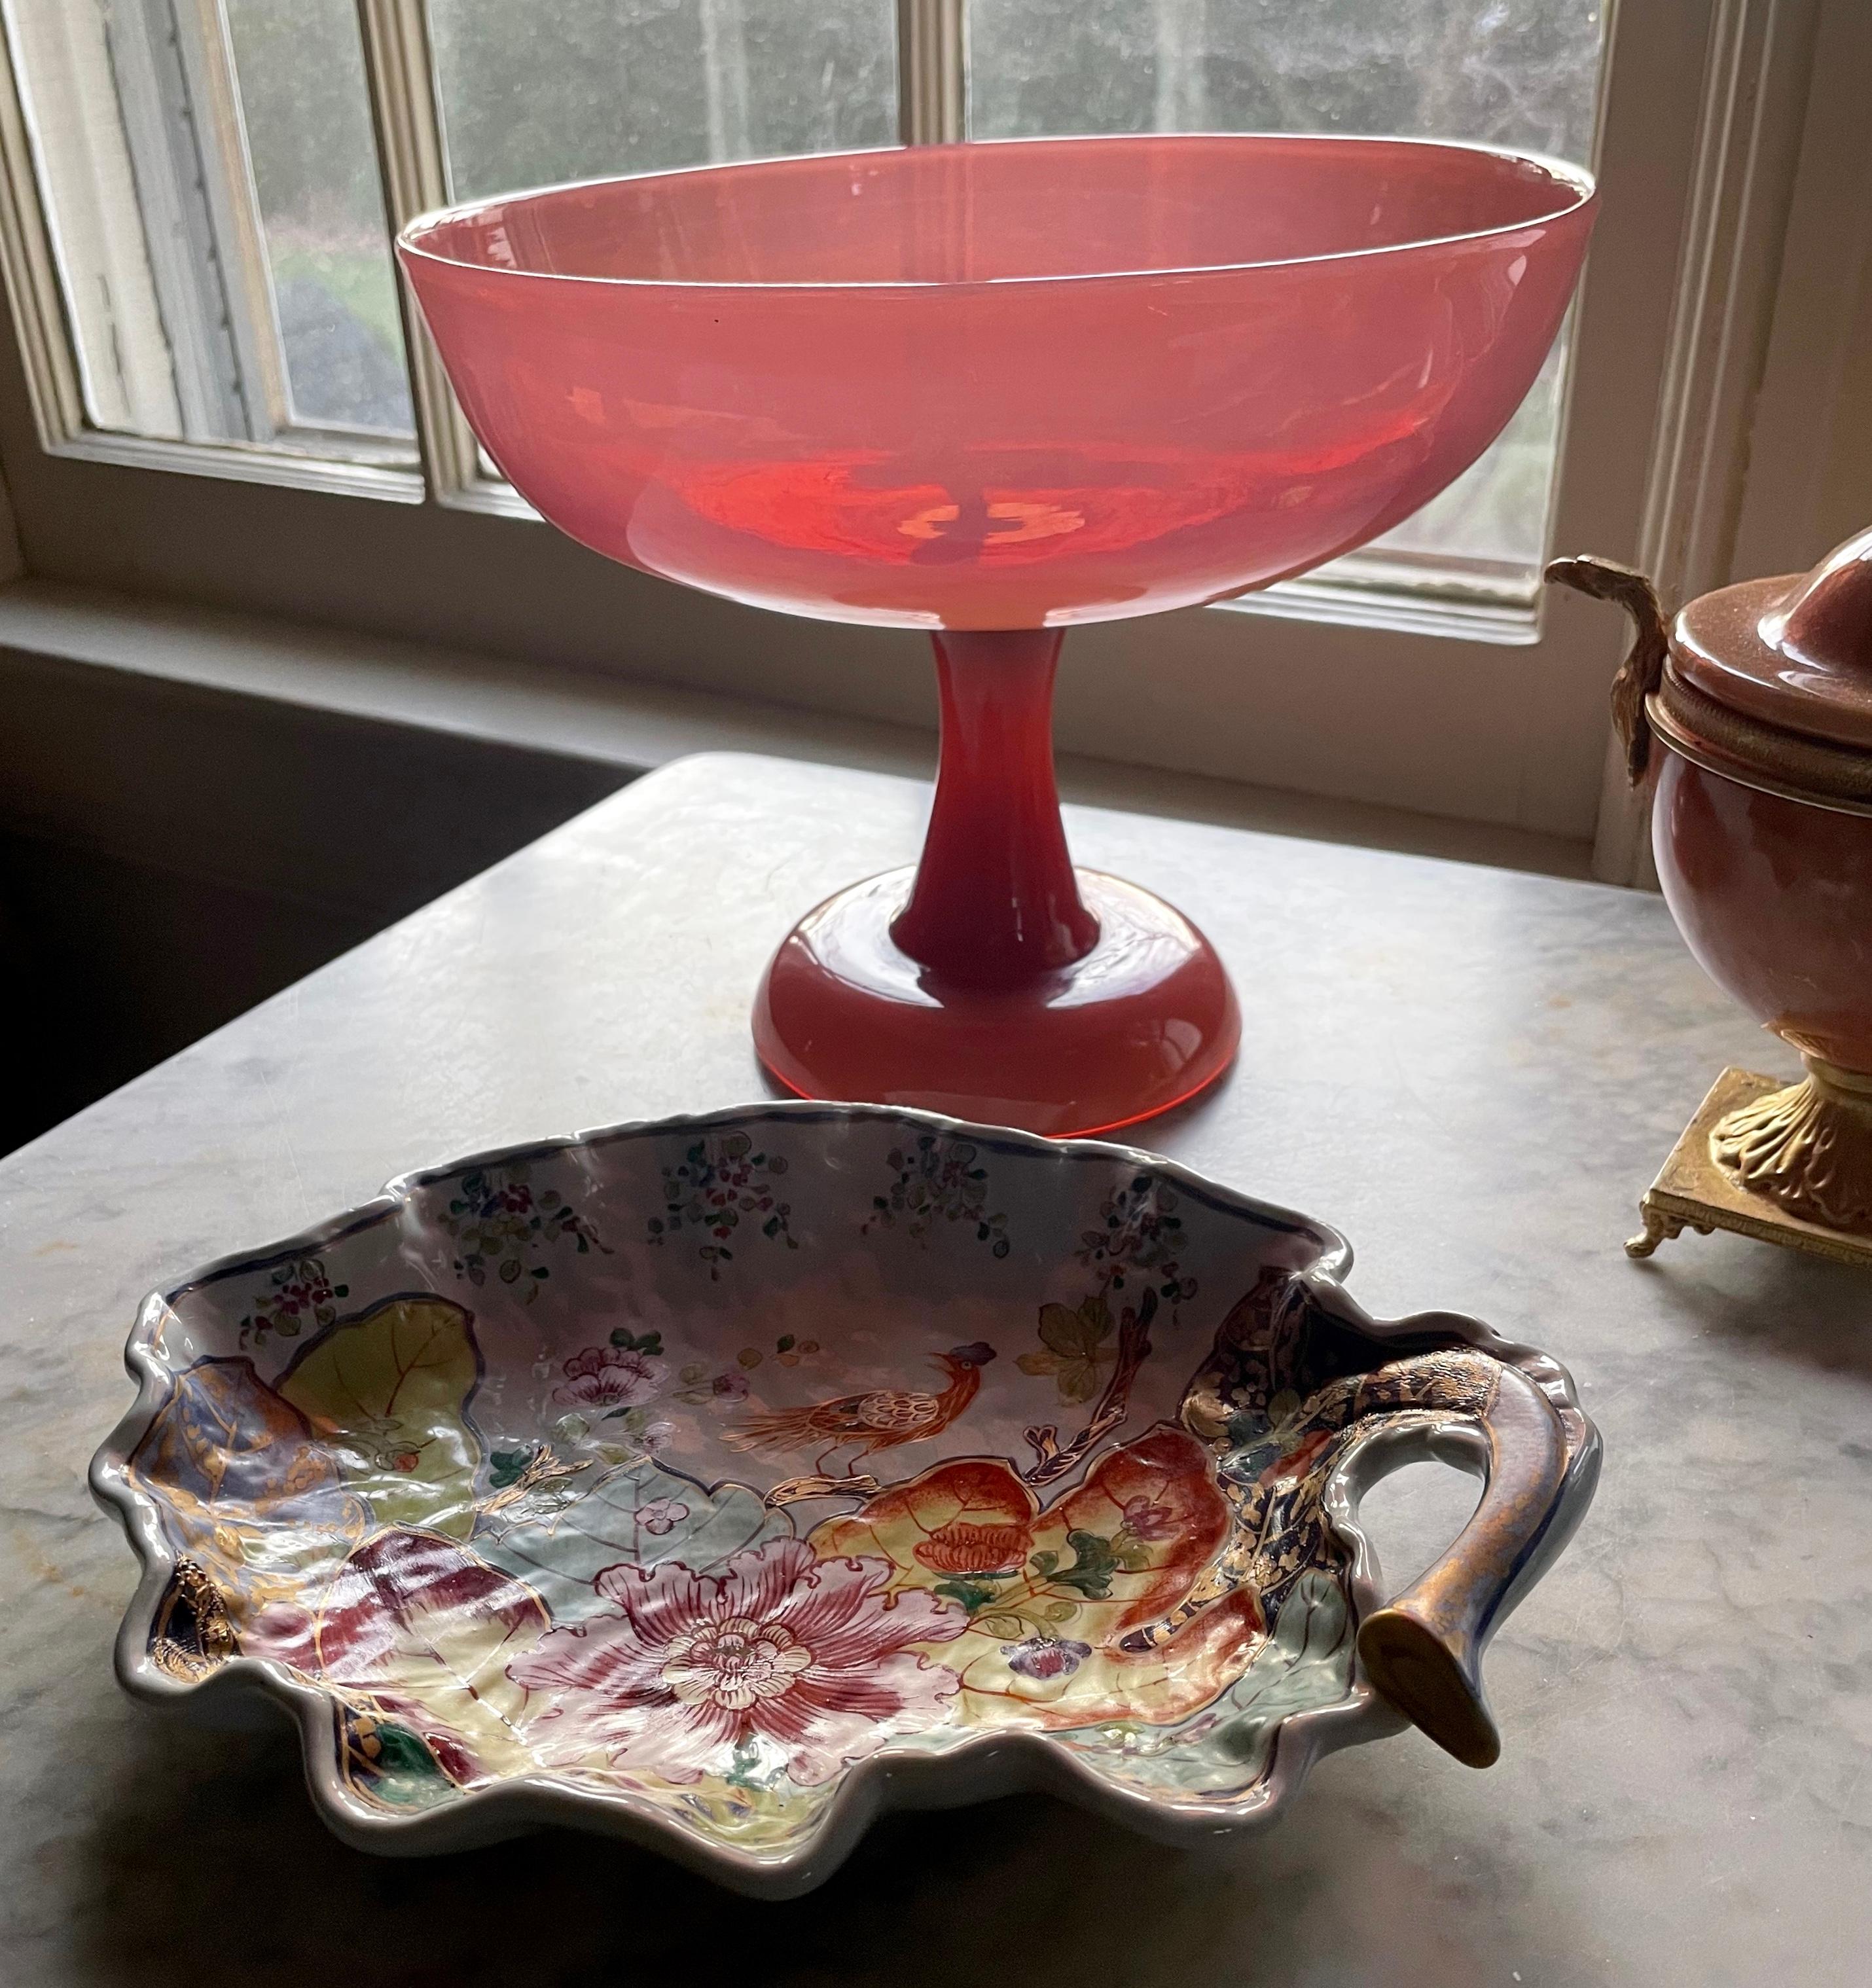 Pink Murano coup centerpiece. Pink blush apricot Murano centerpiece. Italy, mid-20th century.
Dimensions: 9.63” diameter 7.75” H; bowl is 2.63” deep and 5” diameter base.